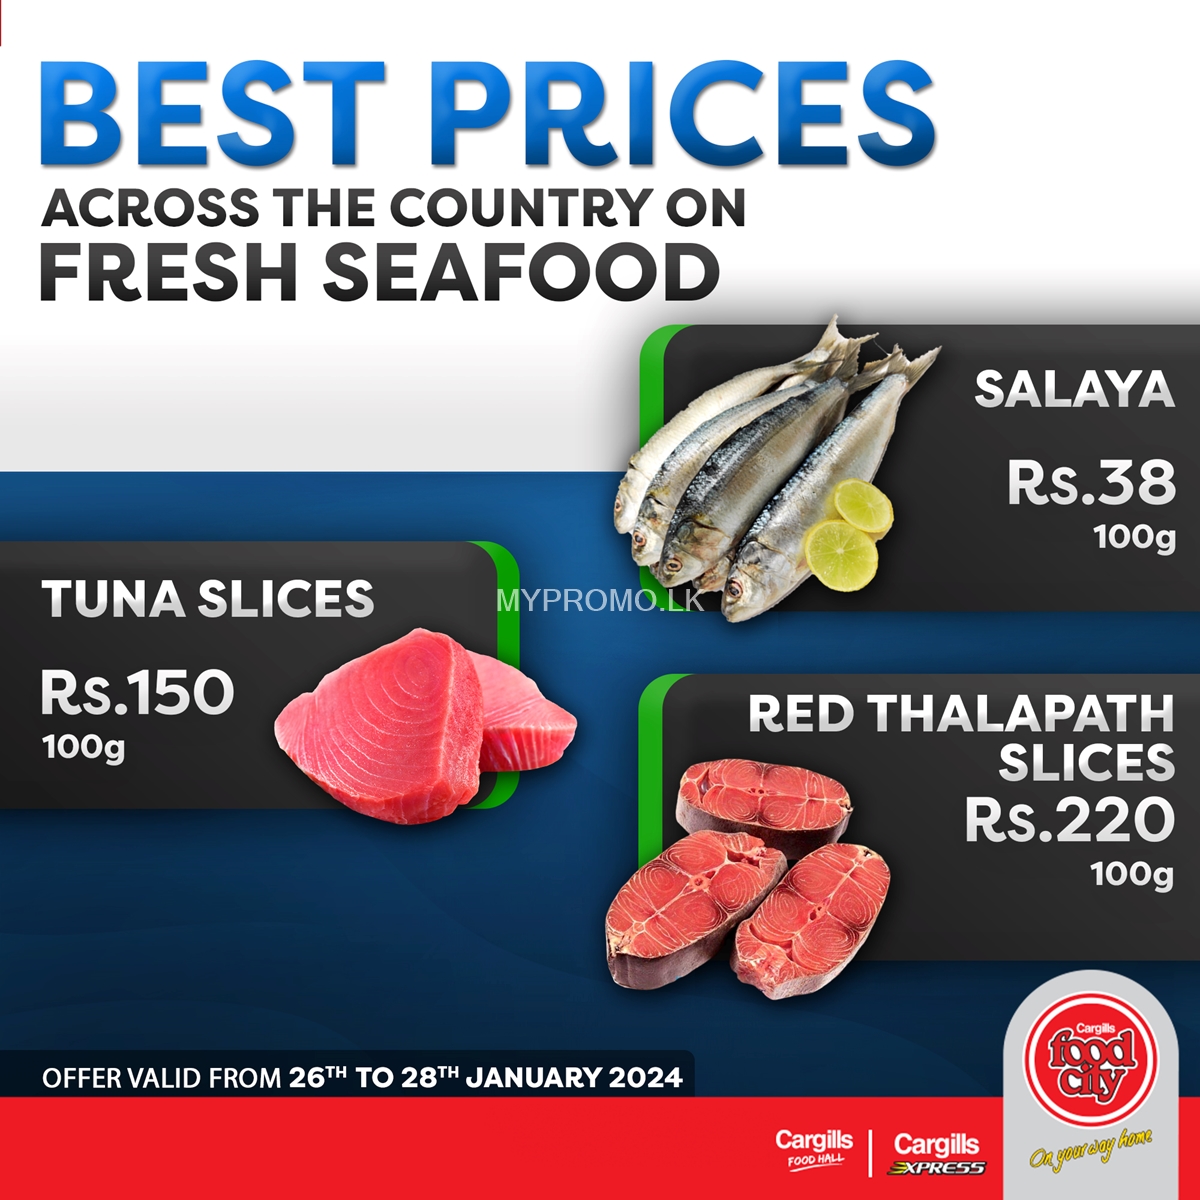 Buy Fresh Seafood at the Lowest Prices and More Savings Across Cargills FoodCity Outlets Island wide!